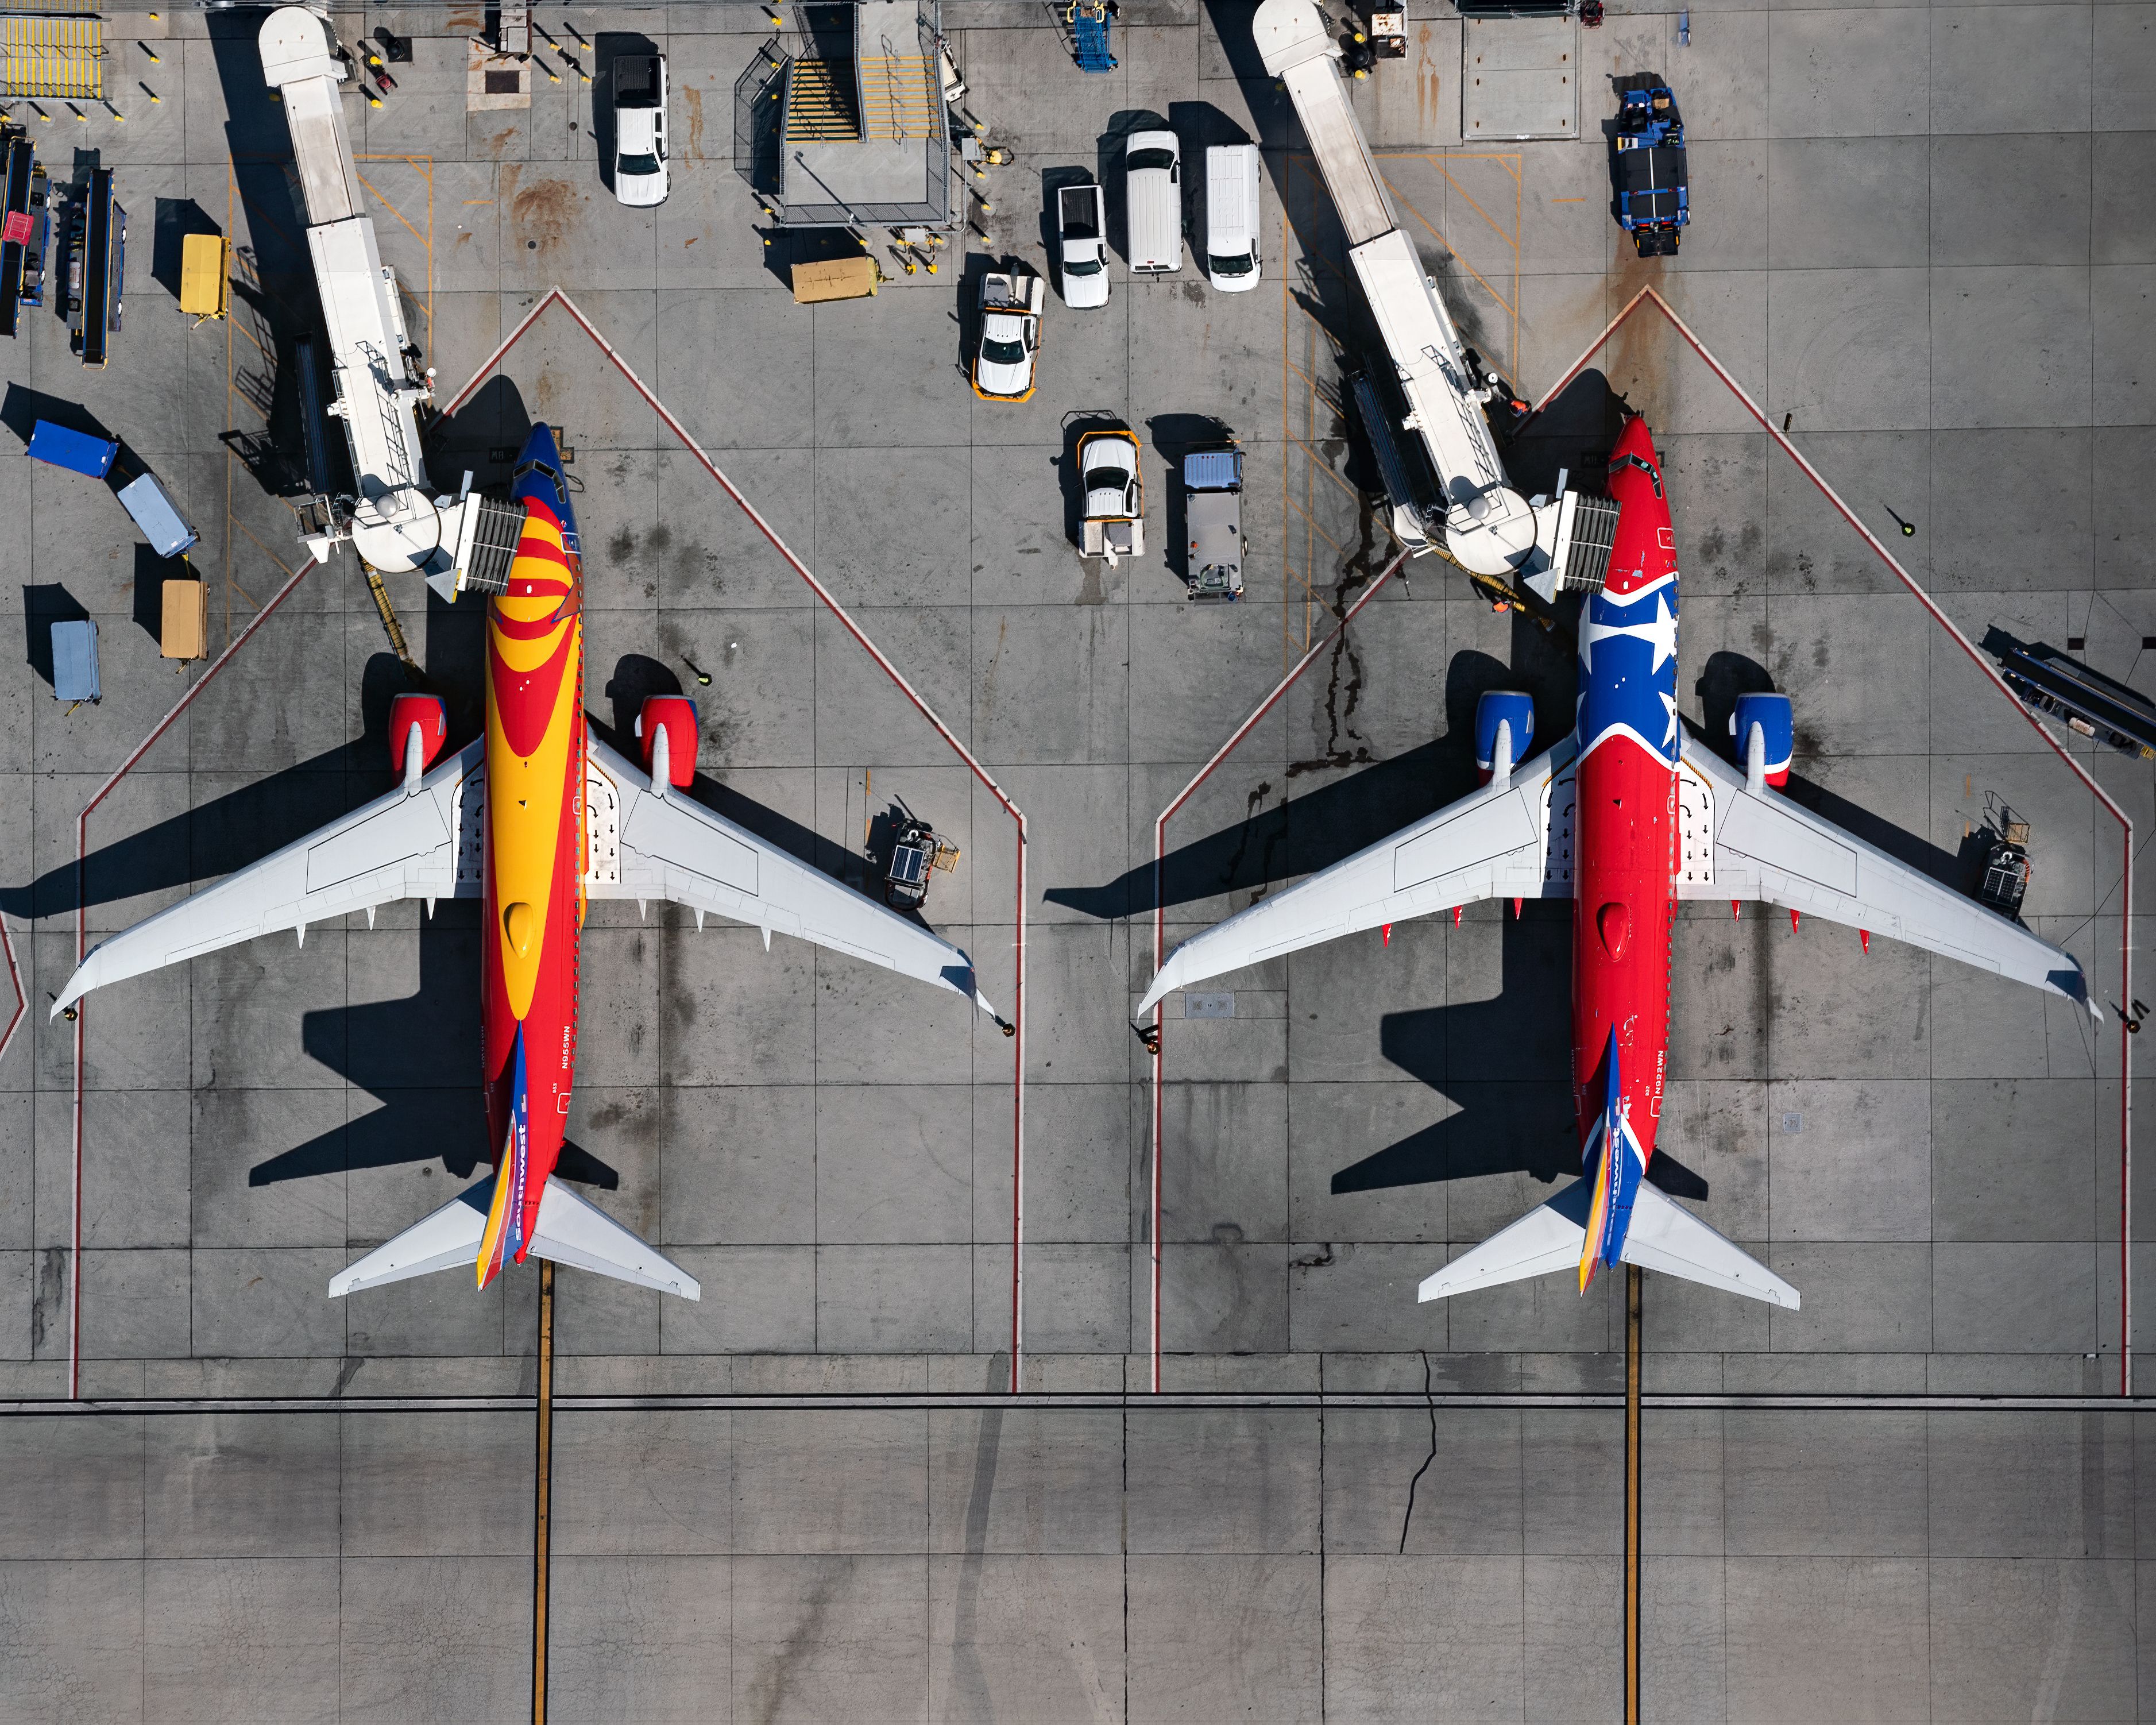 Double Southwest Airlines (2)